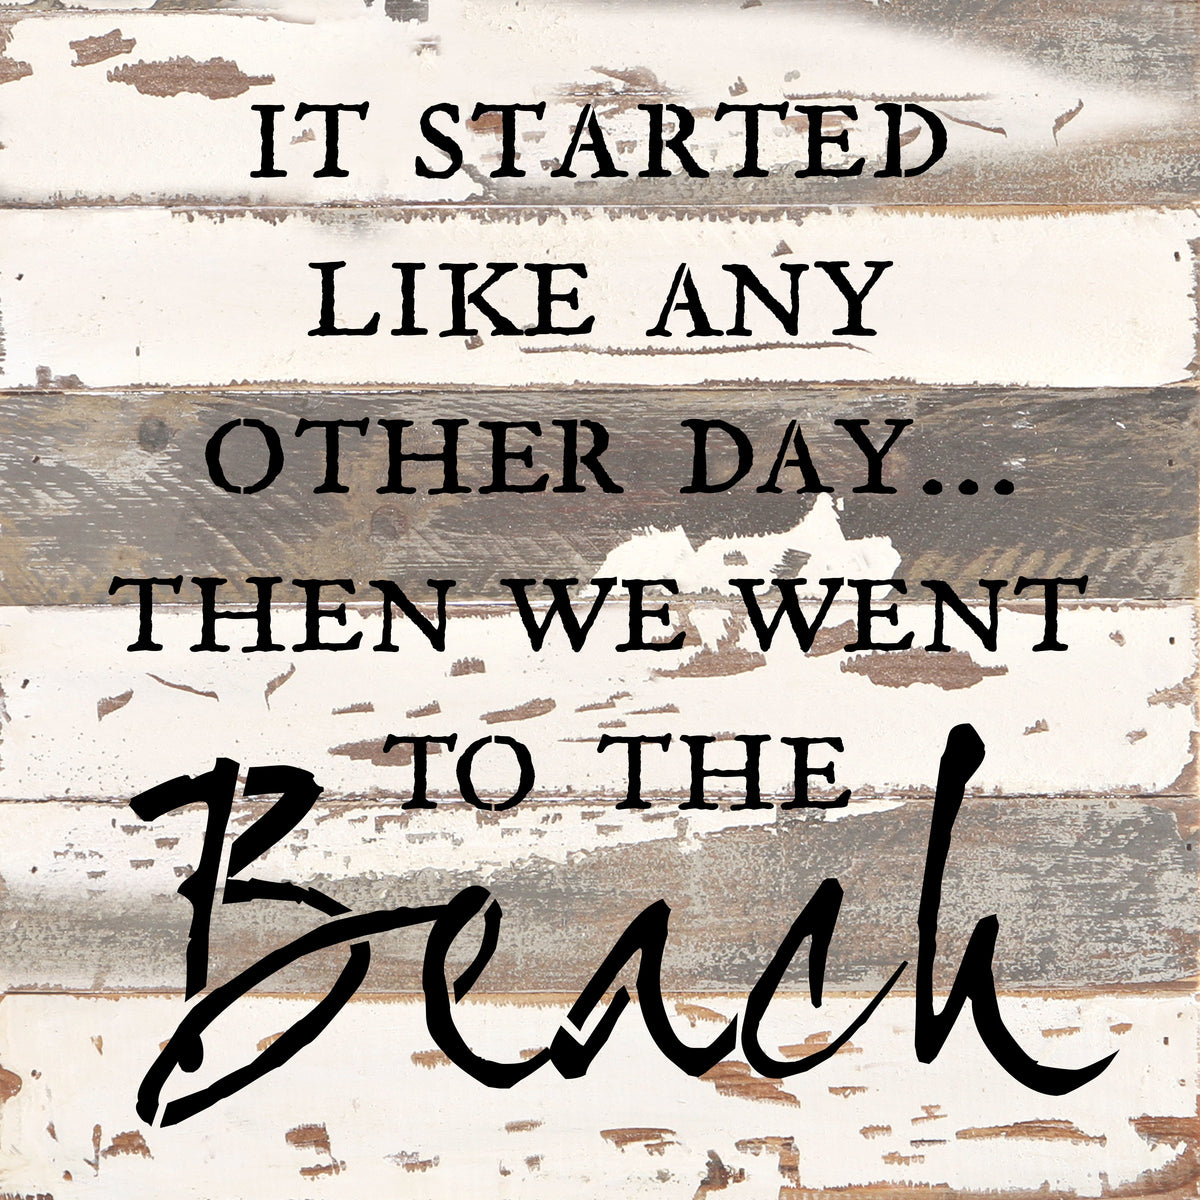 It started like any other day... then we went to the beach! / 12x12 Reclaimed Wood Wall Art